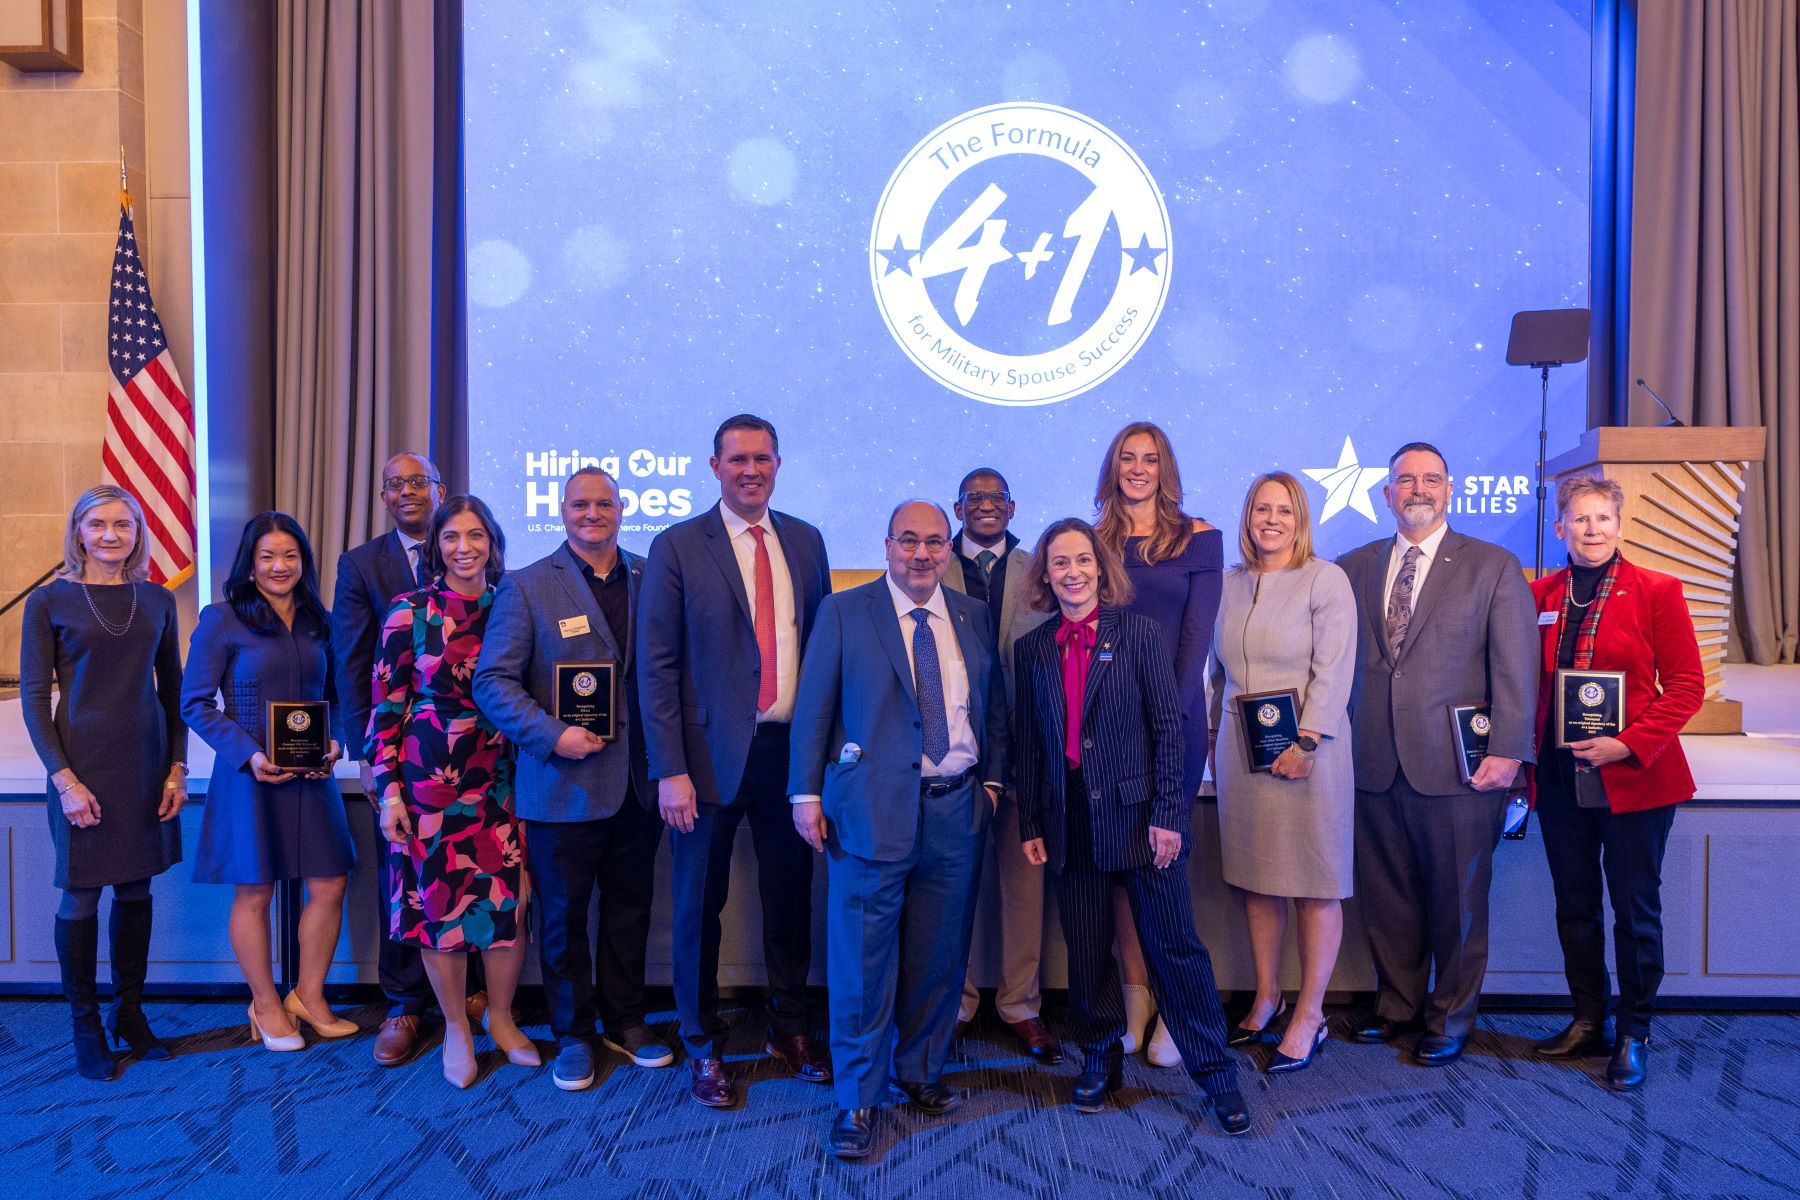 Hiring Our Heroes and Blue Star Families recognized the 12 original signatories during a ceremony at the U.S. Chamber of Commerce in December 2023.